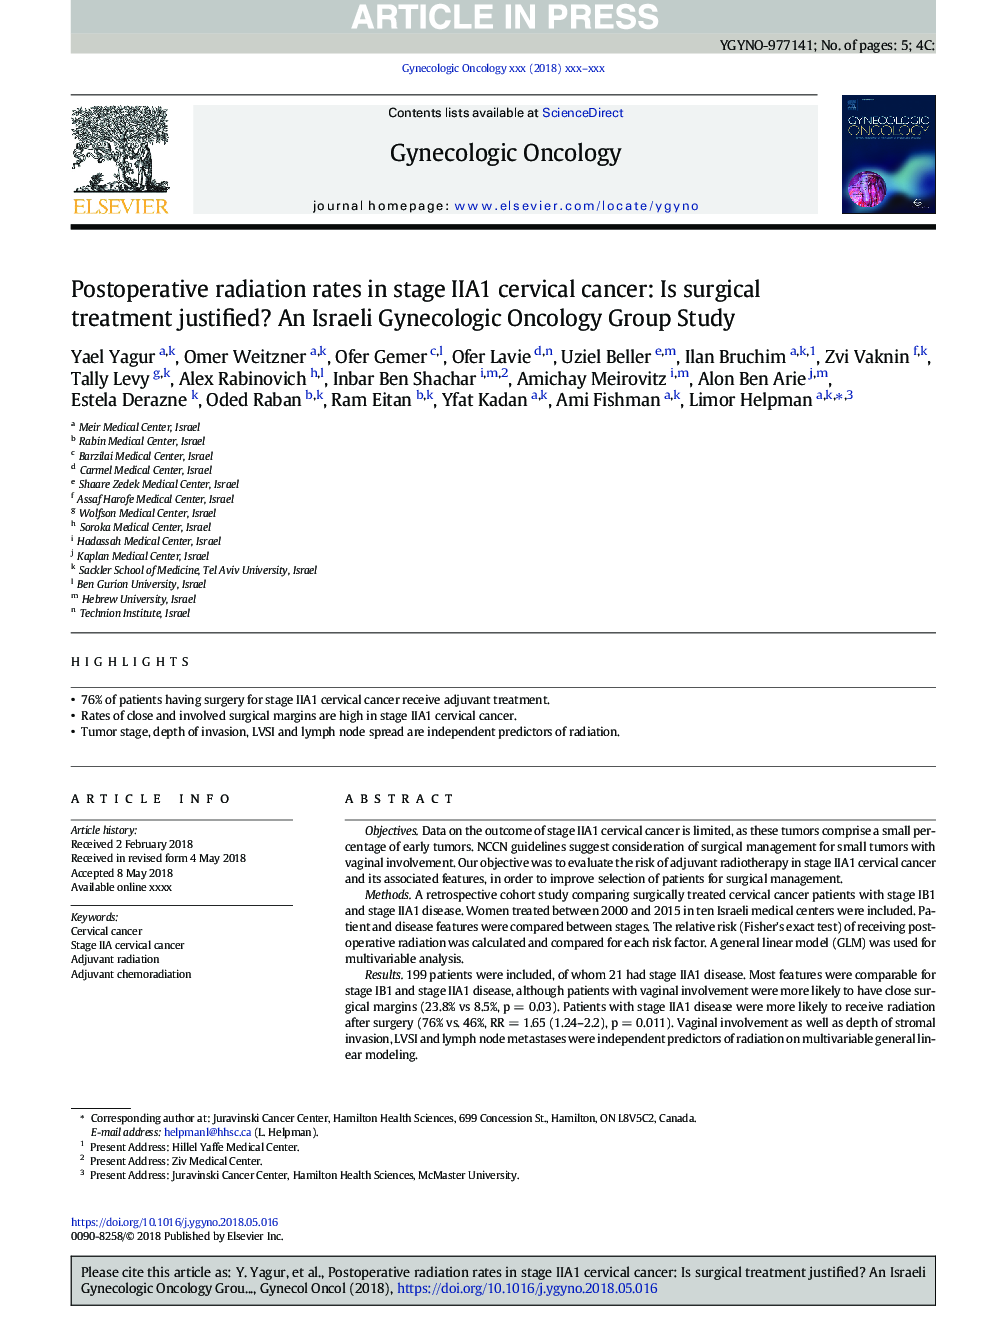 Postoperative radiation rates in stage IIA1 cervical cancer: Is surgical treatment justified? An Israeli Gynecologic Oncology Group Study